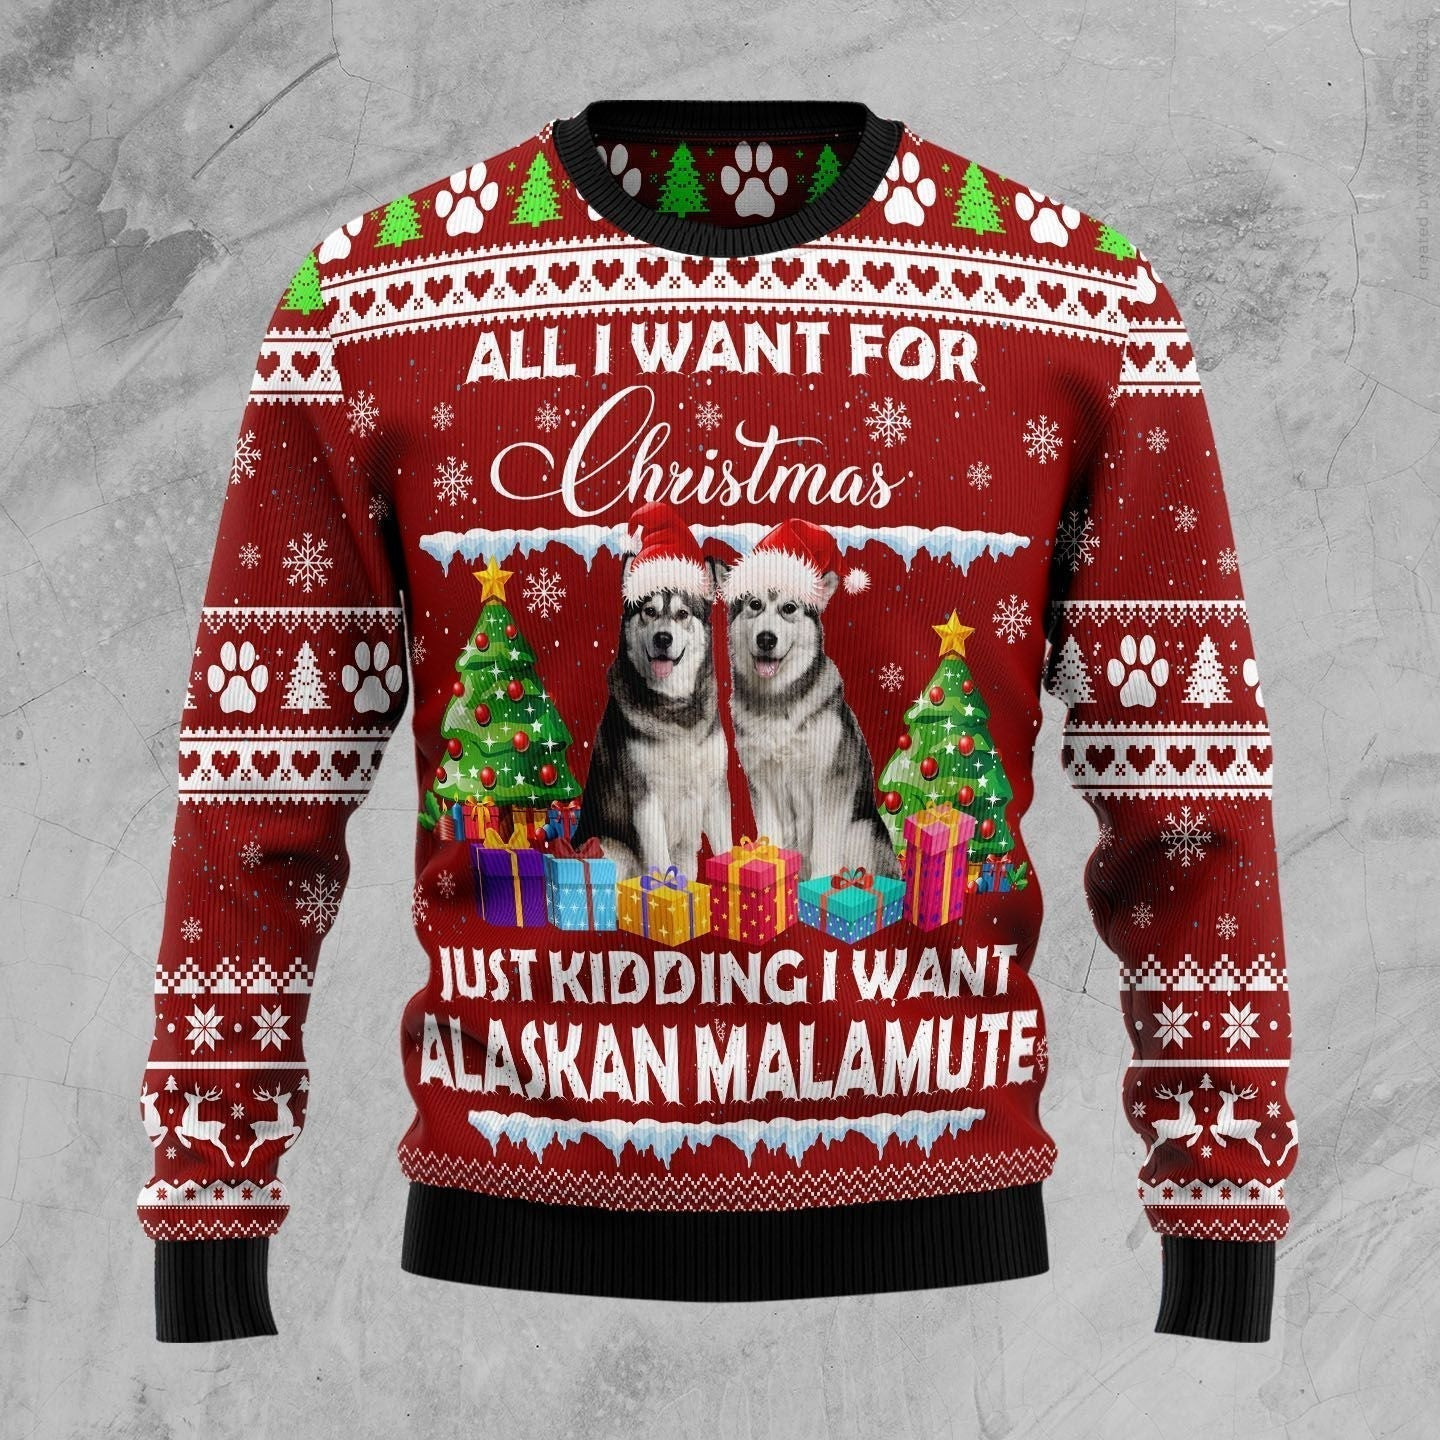 Alaskan Malamute Is All I Want For Xmas Ugly Christmas Sweater Ugly Sweater For Men Women